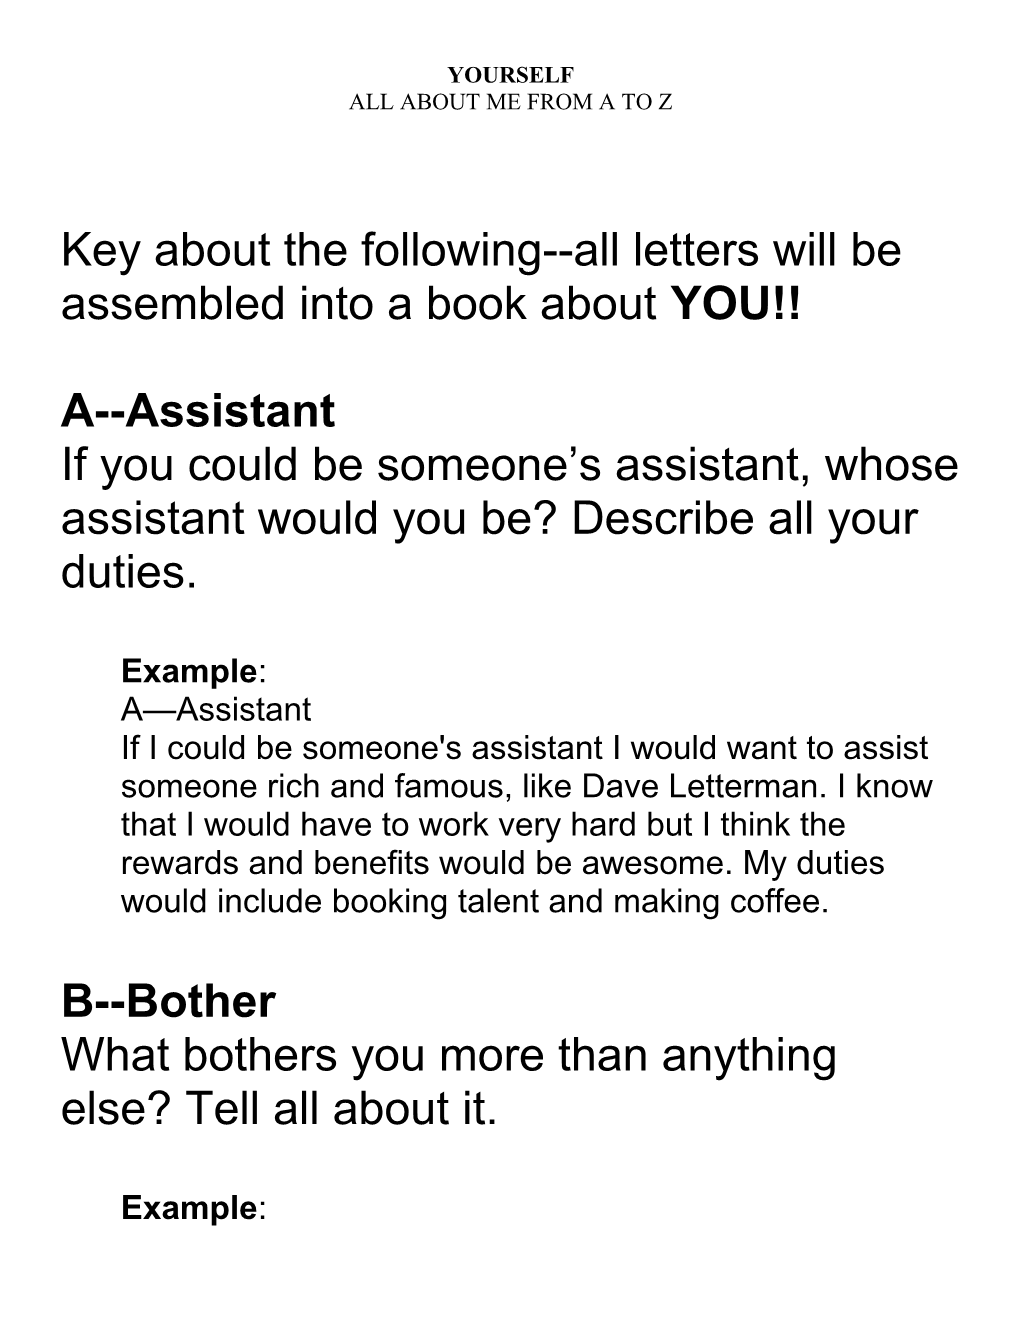 Key About the Following All Letters Will Be Assembled Into a Book About YOU